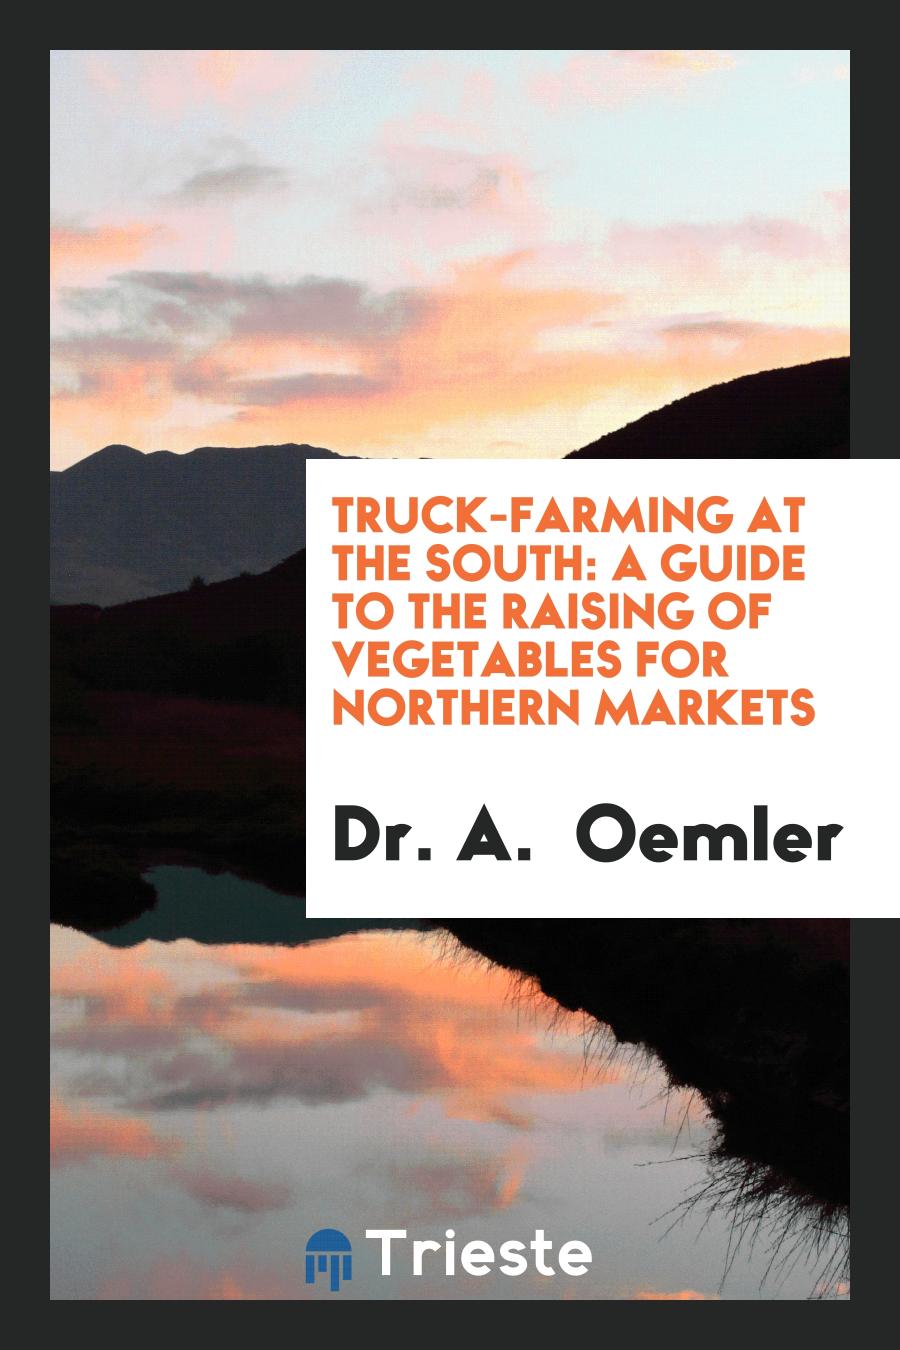 Truck-Farming at the South: A Guide to the Raising of Vegetables for Northern Markets